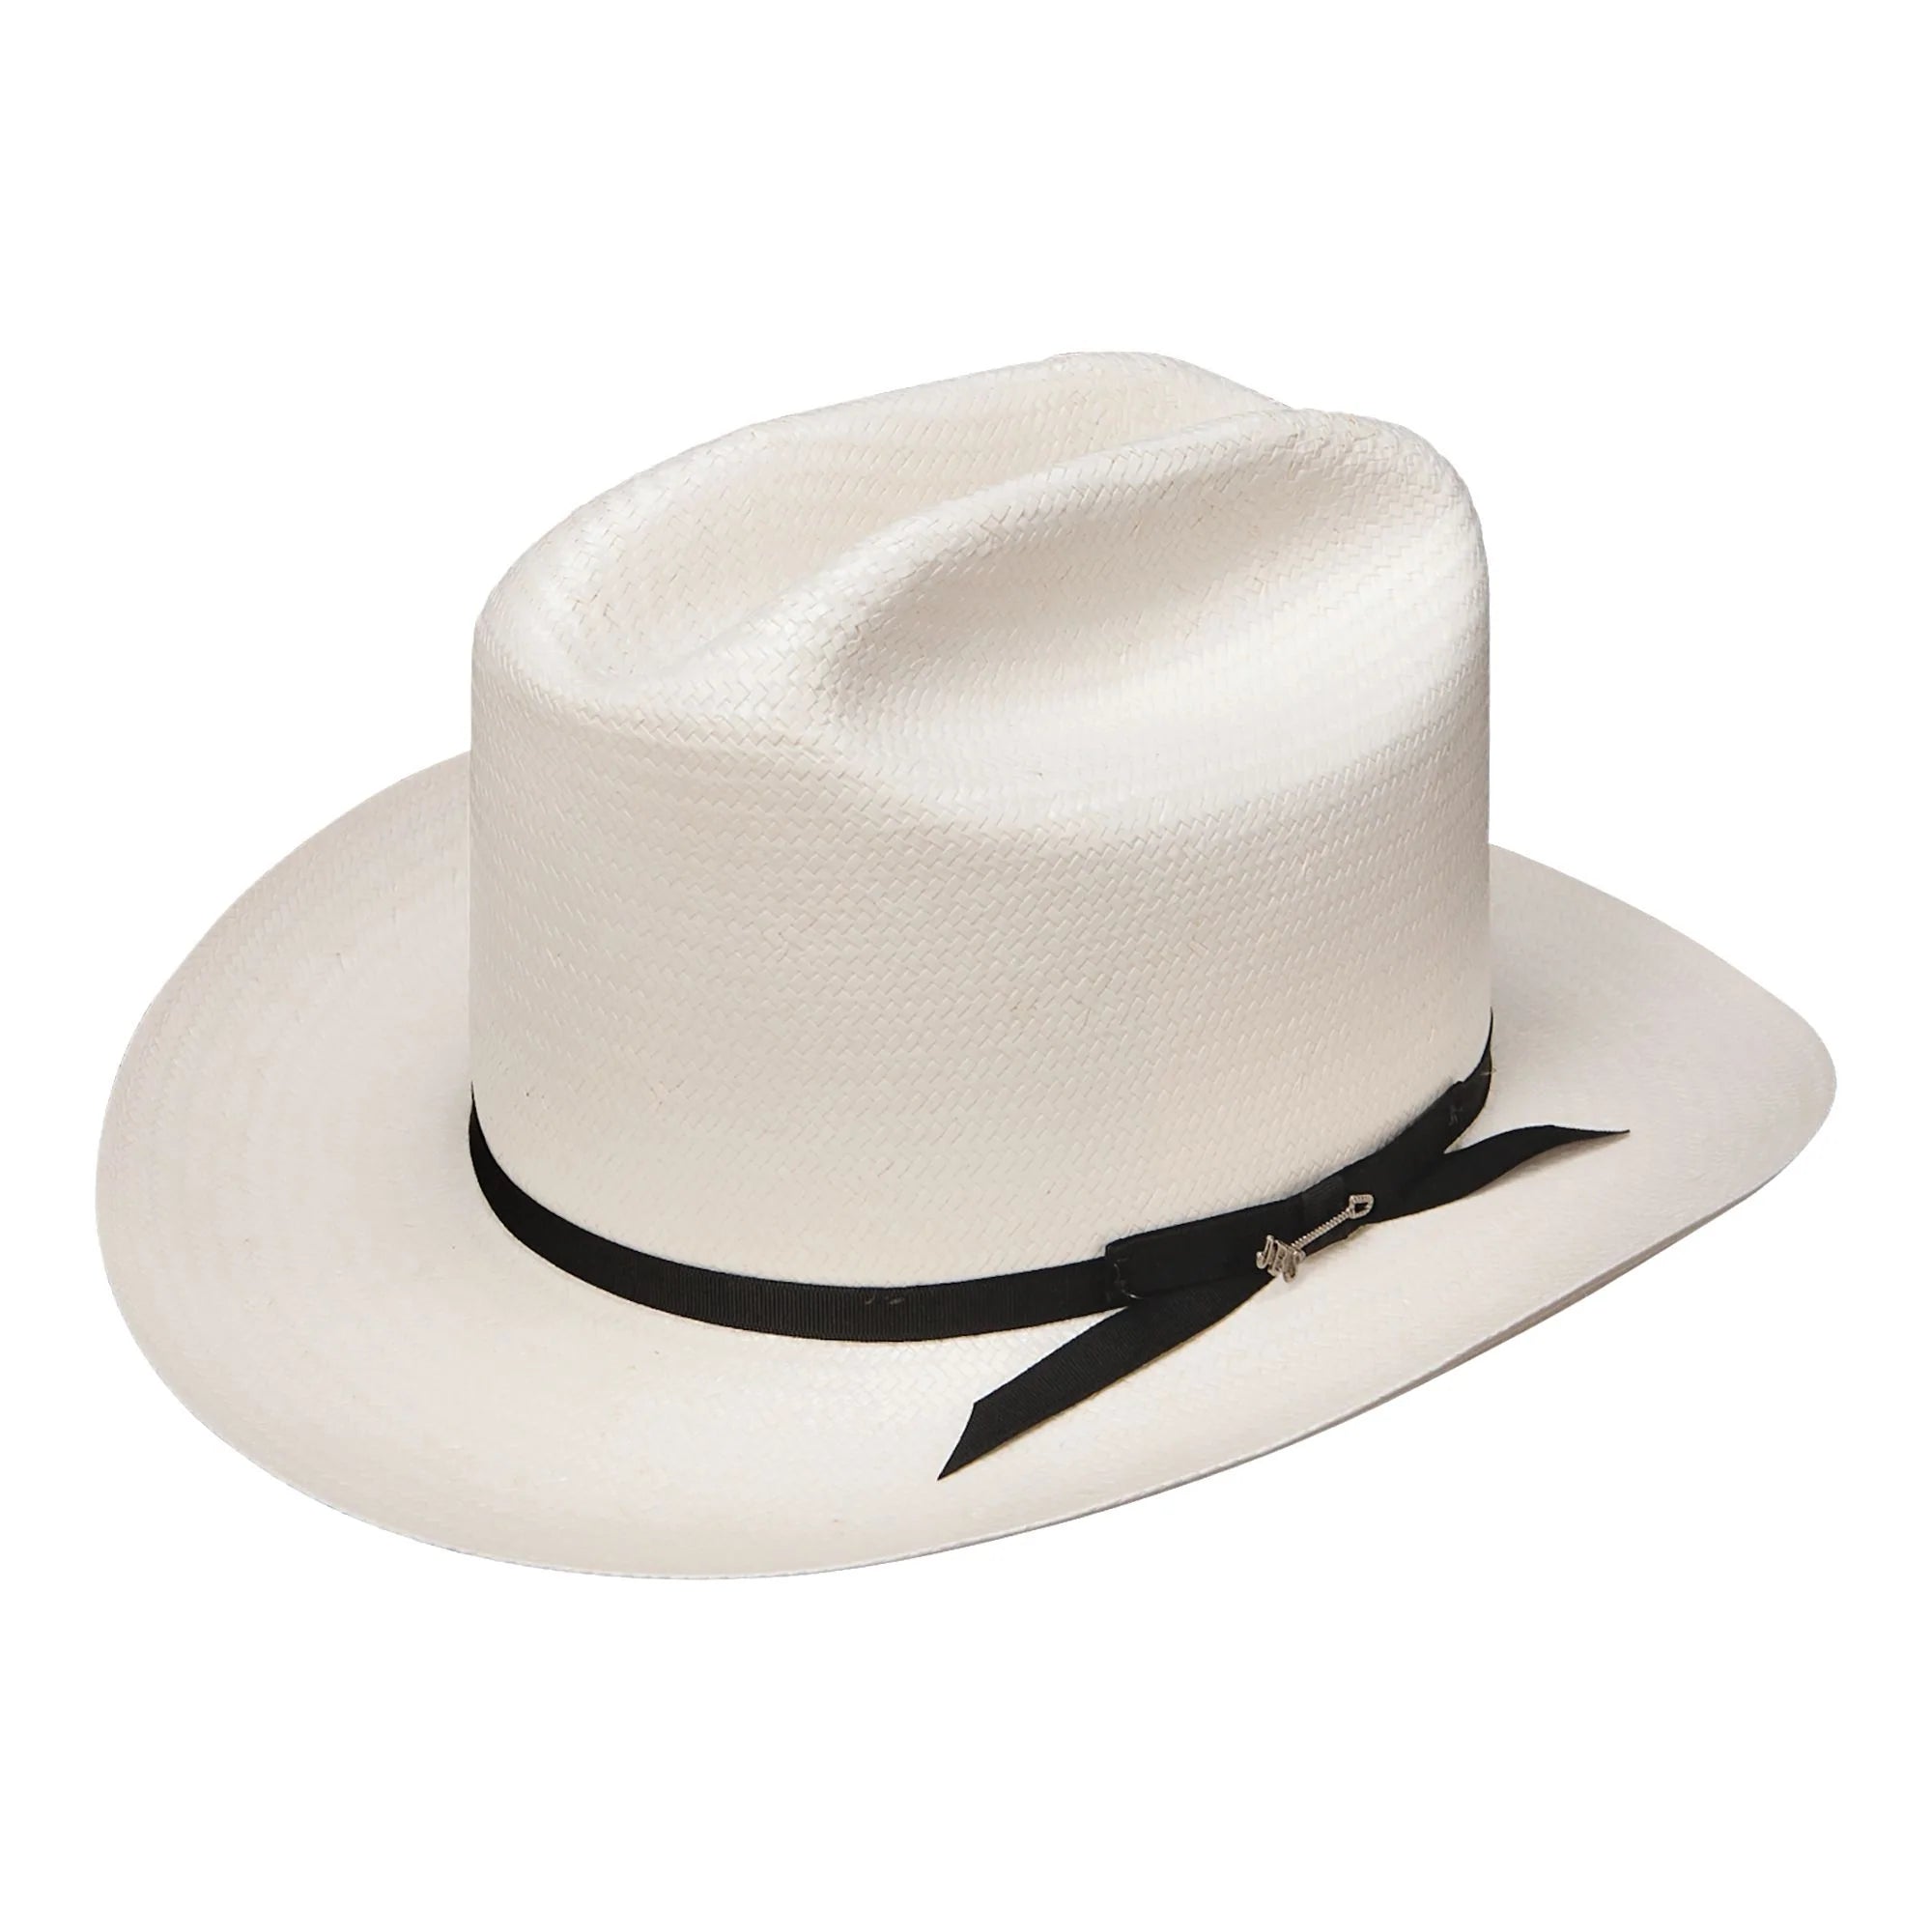 Open Road 4X Straw Cowboy Hat ( also known as LBJ)